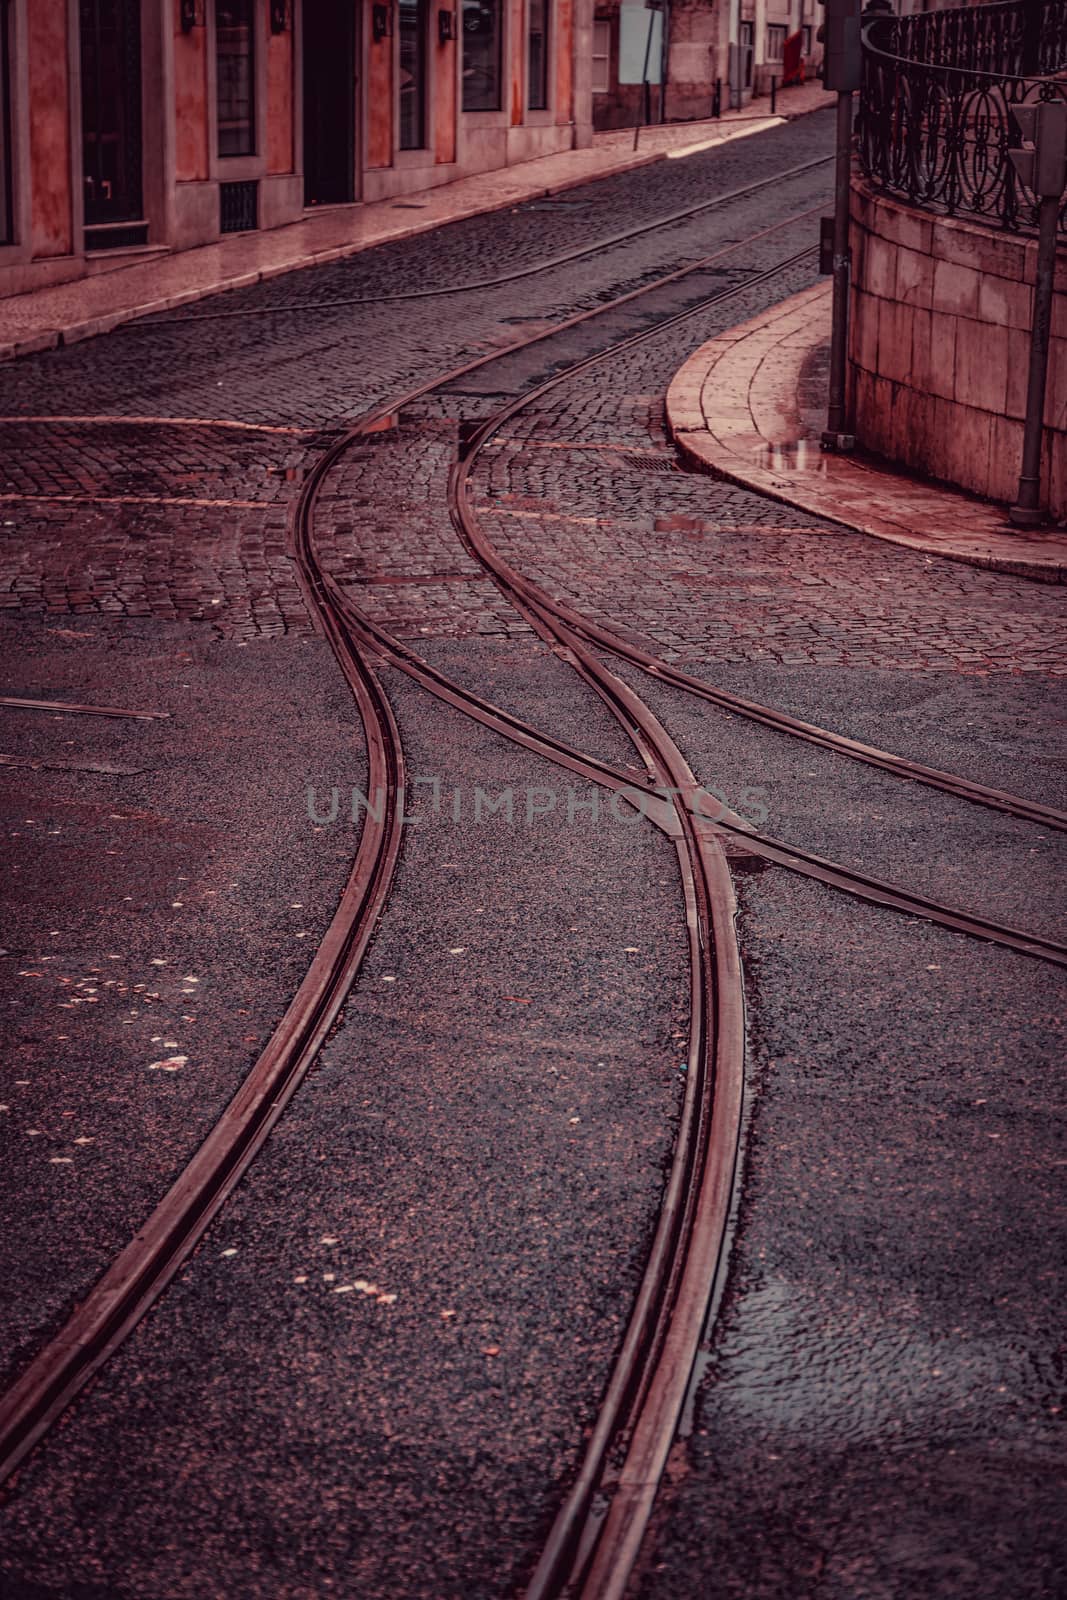 Tram tracks on a street in Lisbon, detail of a route for public transport in the city